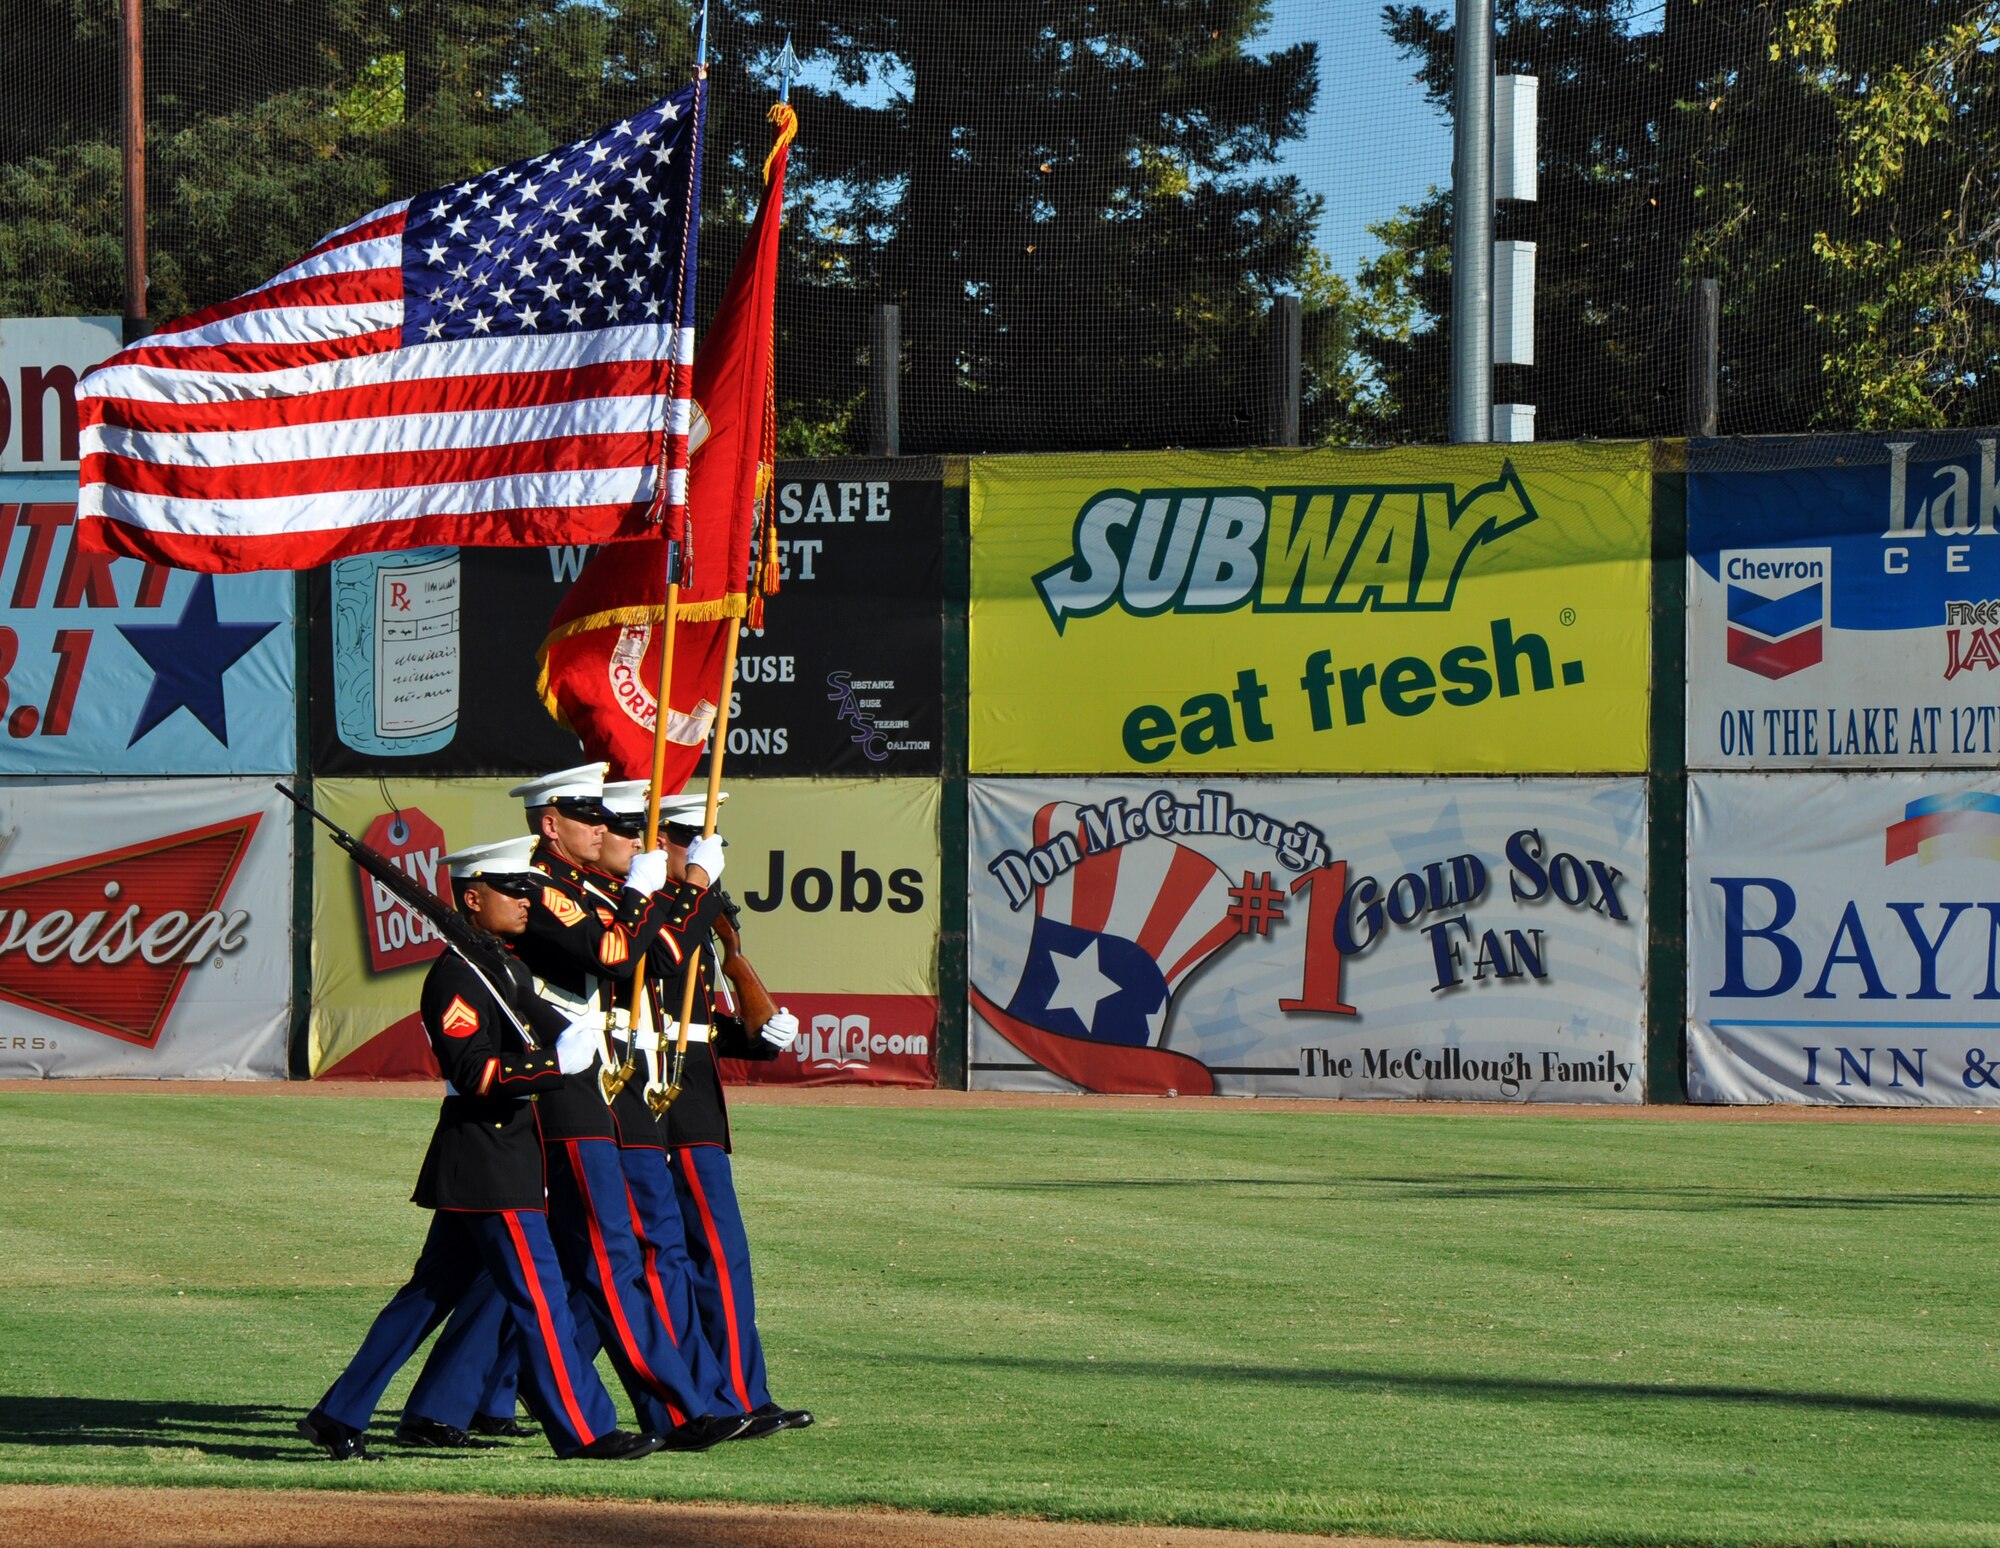 Members of a U.S. Marine Corps color guard perform during the opening ceremonies of Military Appreciation Night at a Marysville Gold Sox game at Appeal-Democrat Park, Marysville, Calif., July 29, 2012. The color guard was from a reserve unit in Sacramento. (U.S. Air Force photo by Staff Sgt. Robert M. Trujillo)